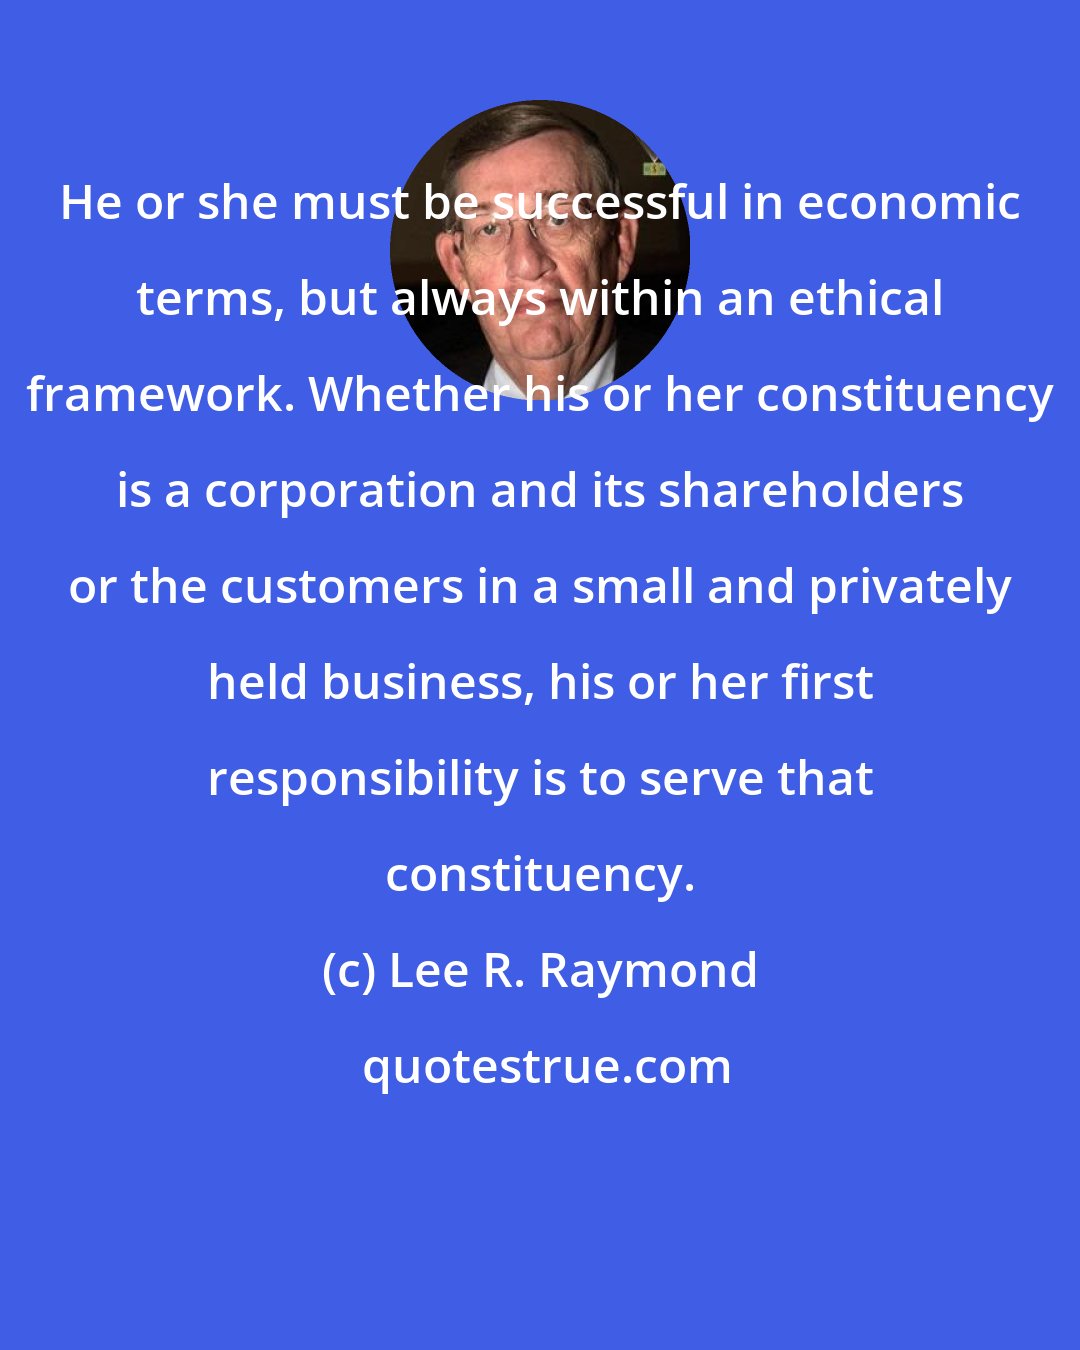 Lee R. Raymond: He or she must be successful in economic terms, but always within an ethical framework. Whether his or her constituency is a corporation and its shareholders or the customers in a small and privately held business, his or her first responsibility is to serve that constituency.